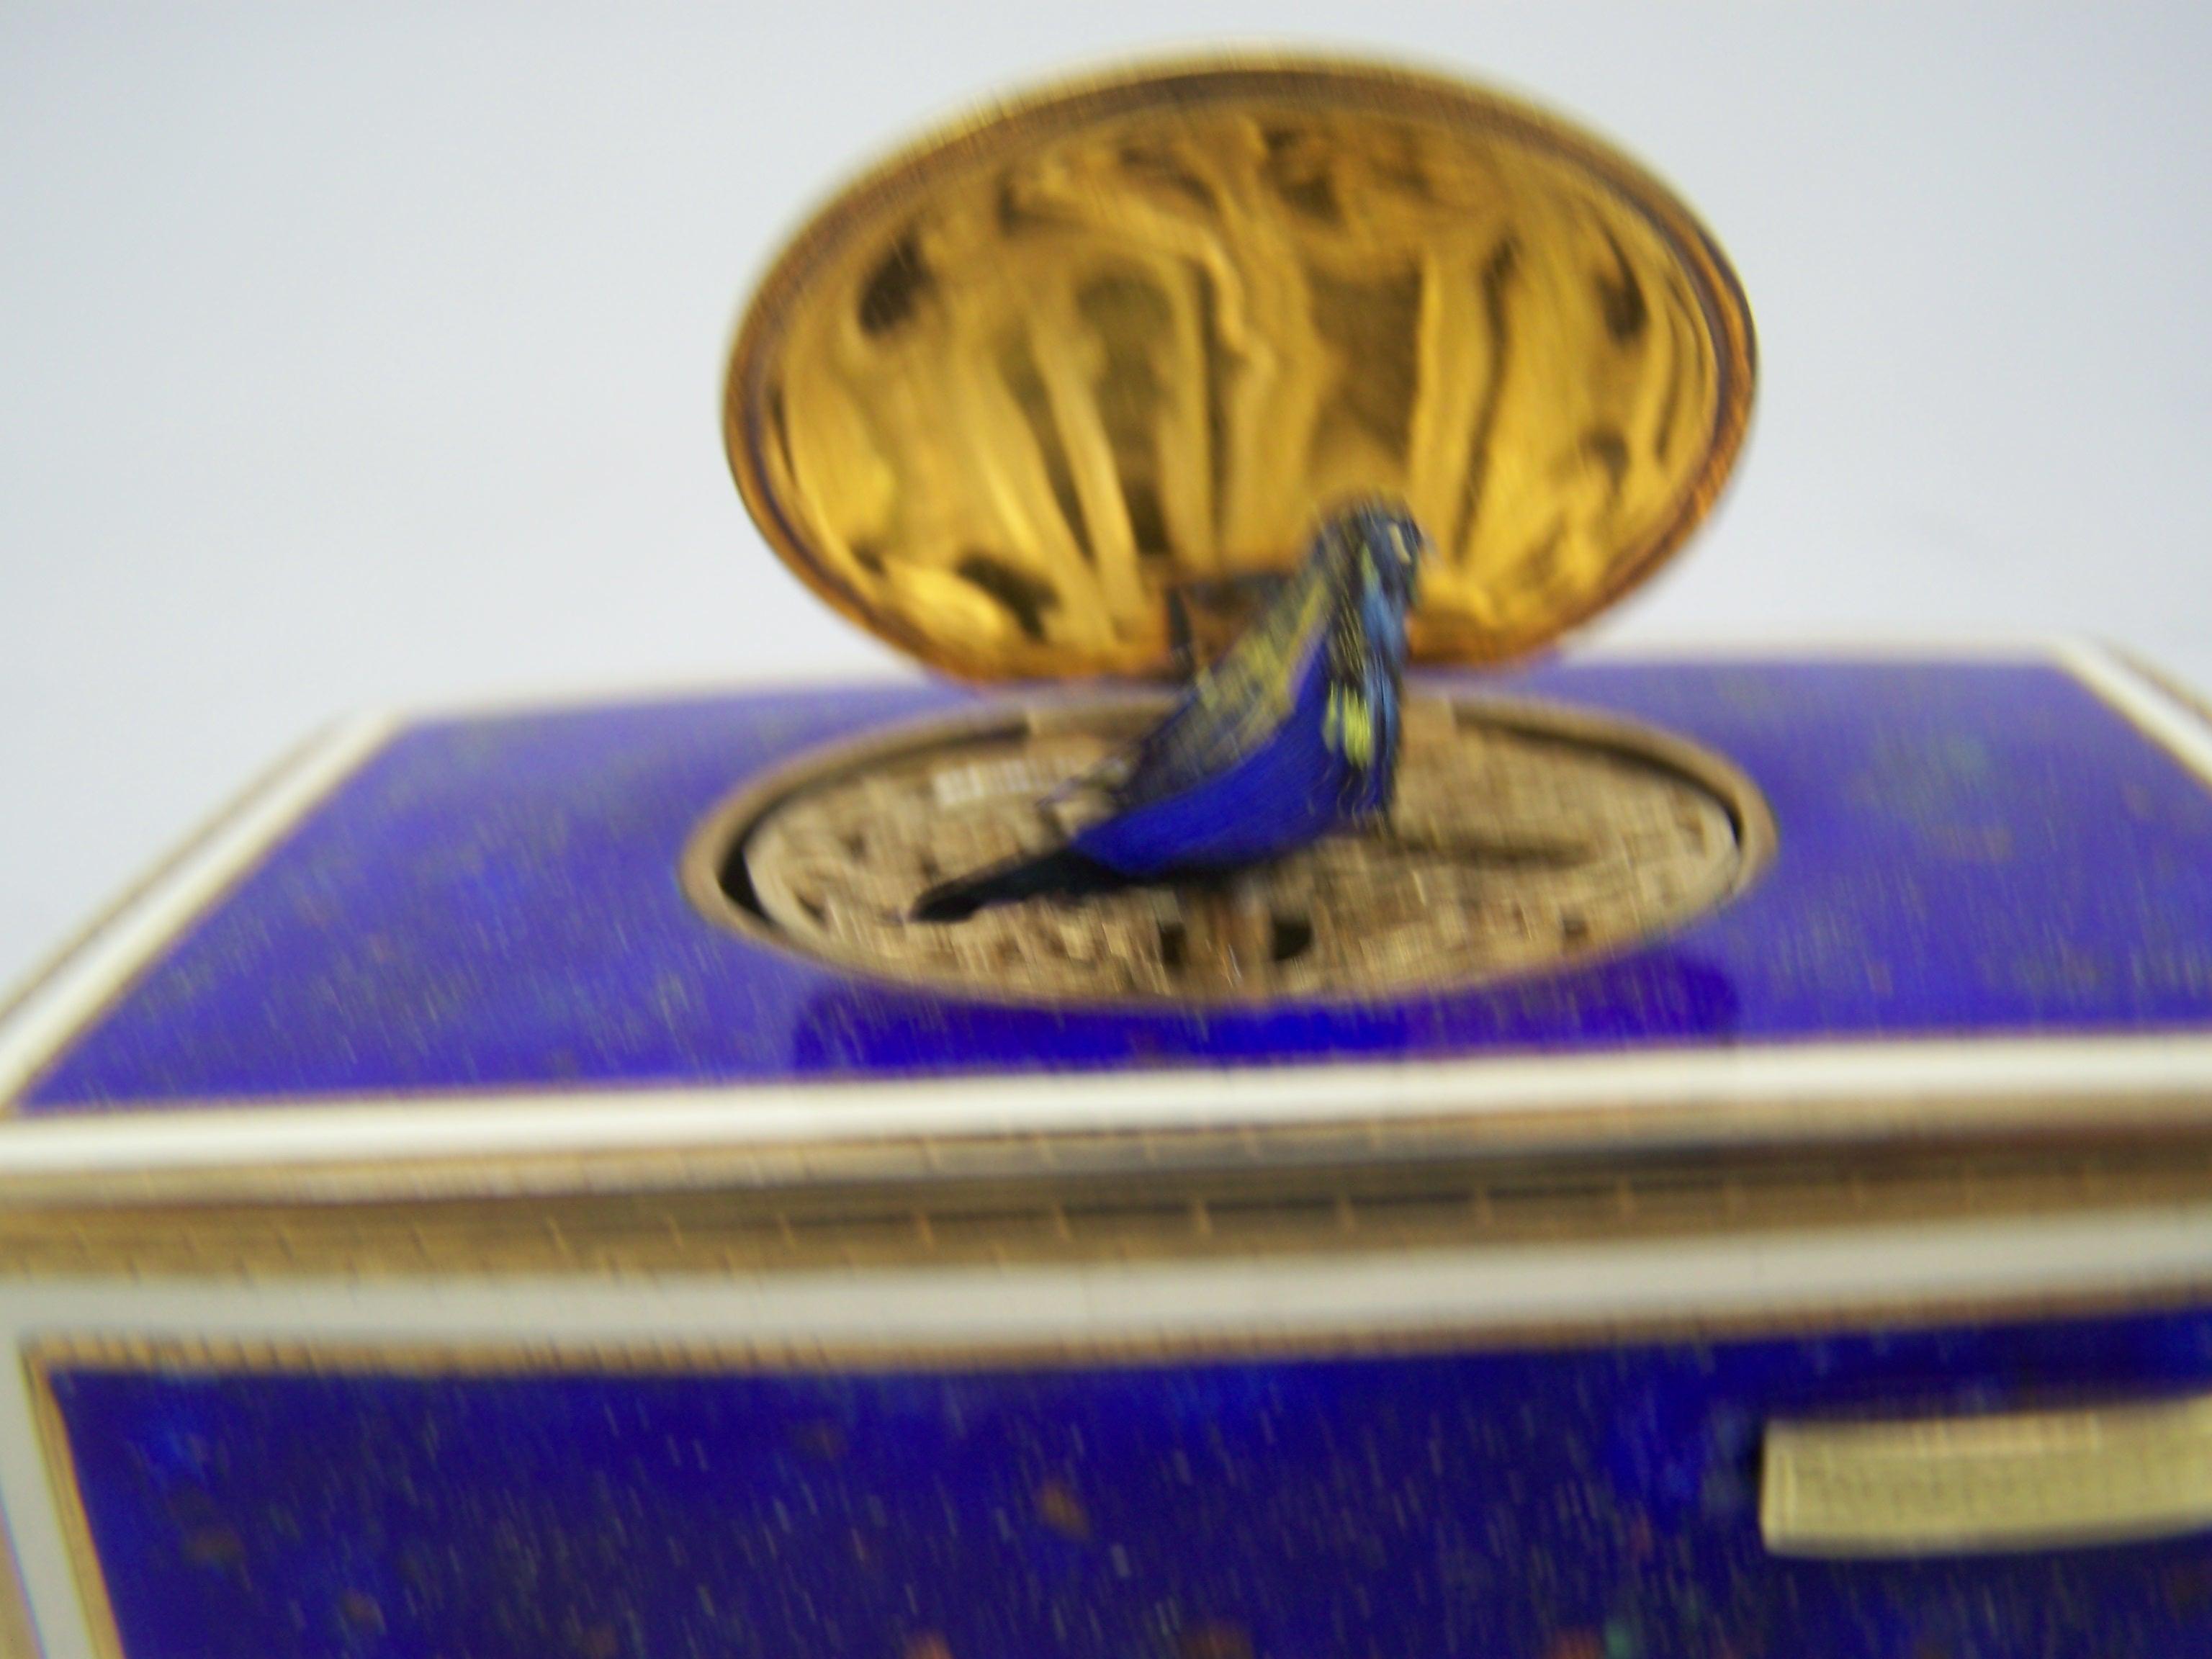 20th Century Singing bird box by K Griesbaum in guilded case and blue-goldflaked enamel